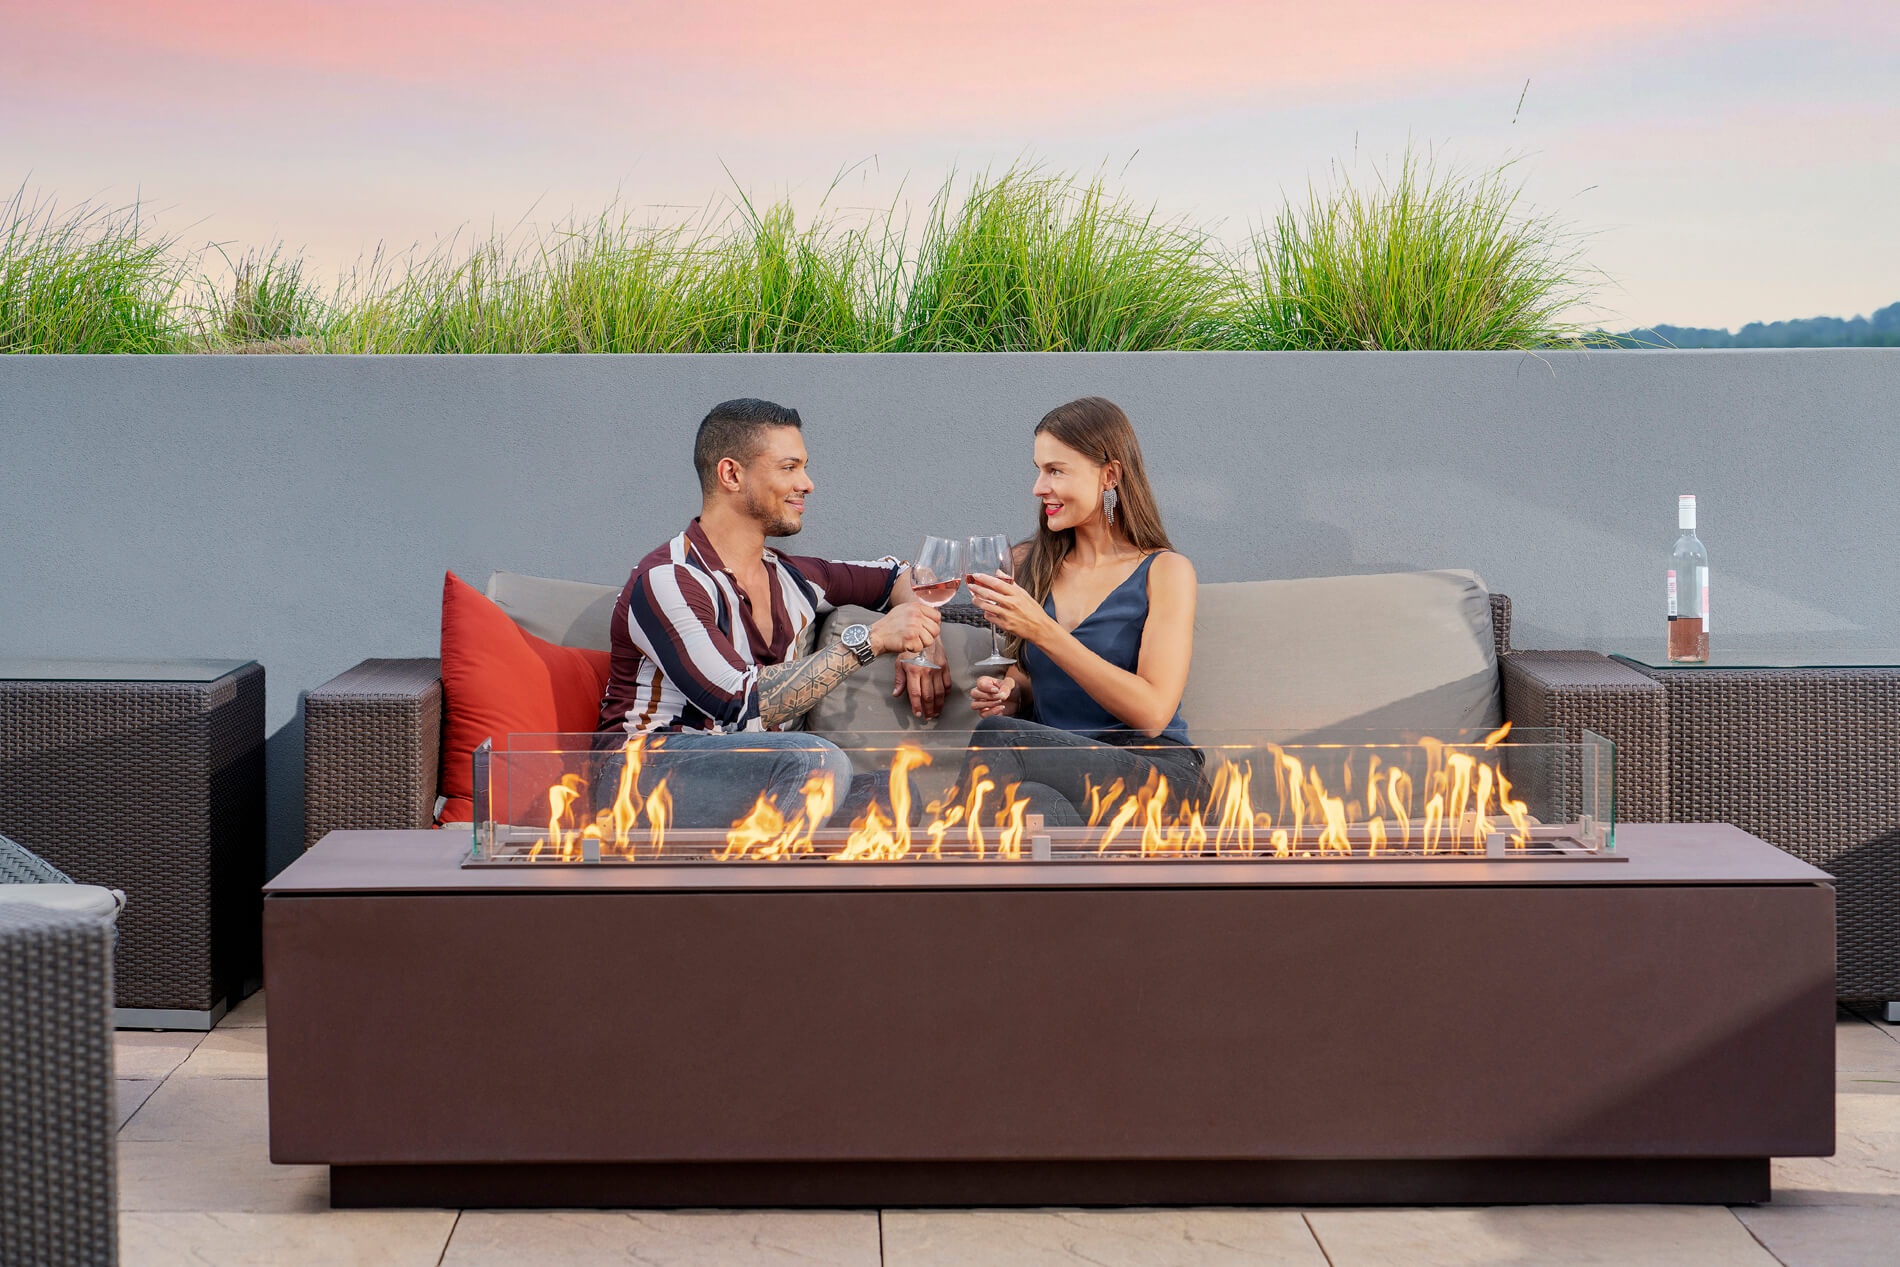 Couple sitting by fireplace